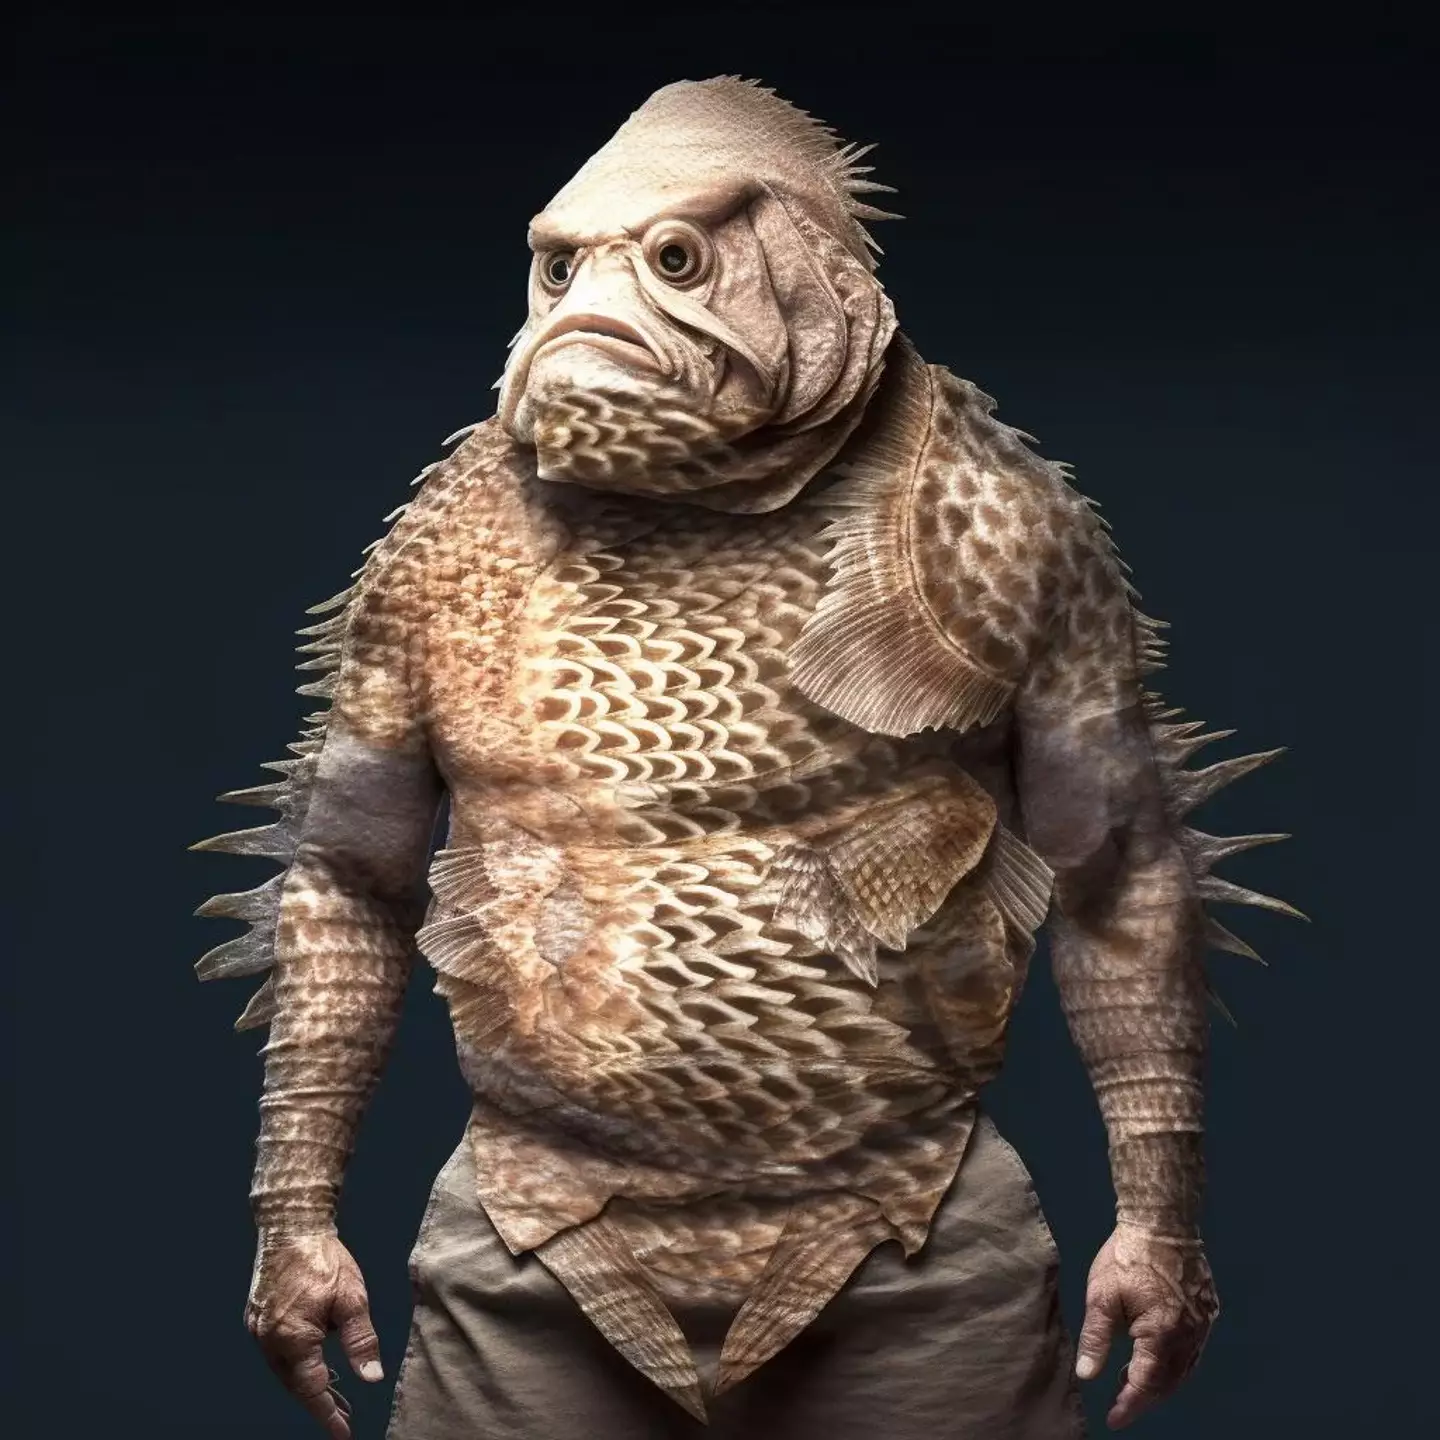 This fish-man/man-fish also looks rather funky.